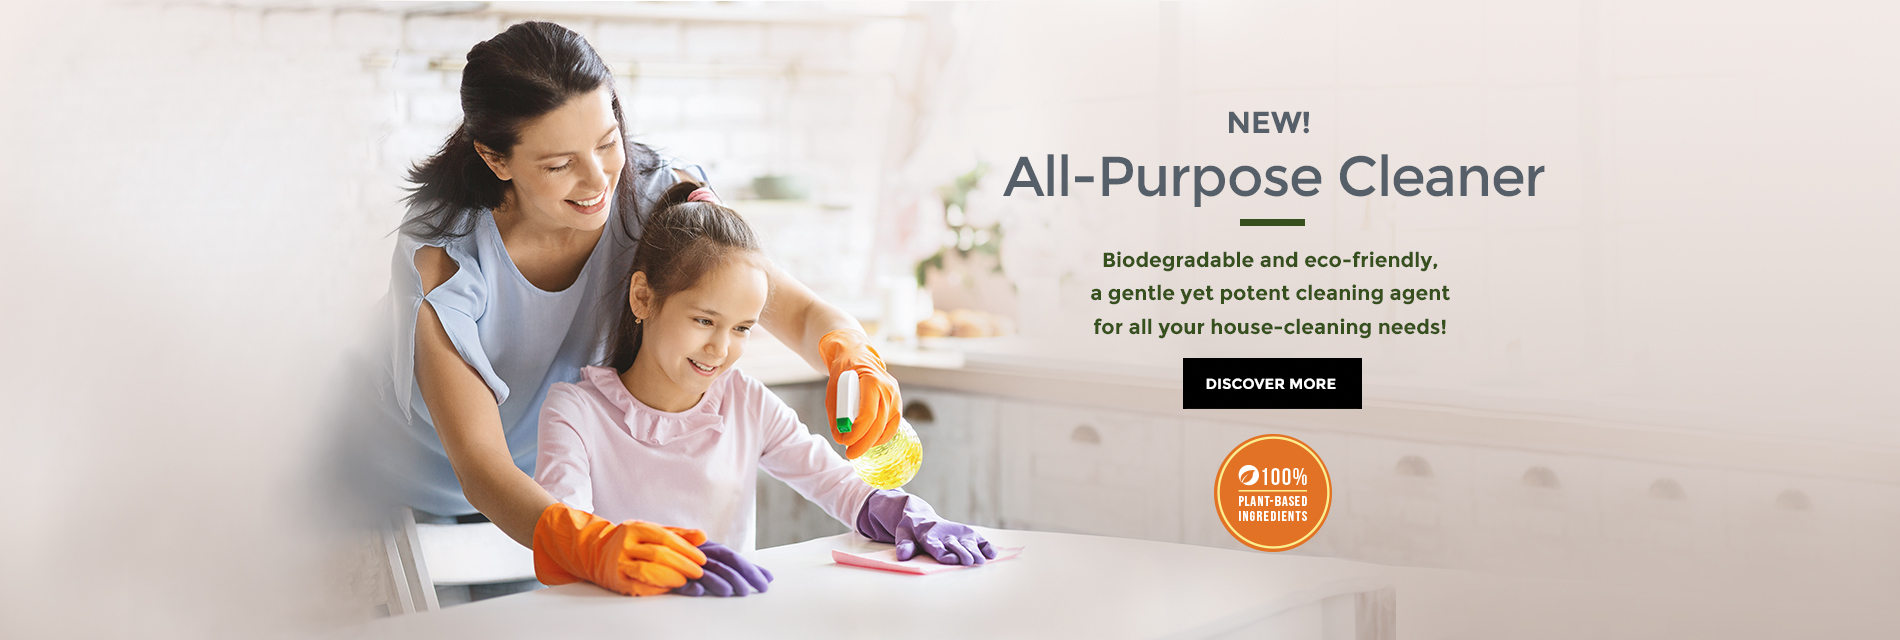 Biodegradable and Eco-friendly All-Purpose Cleaner